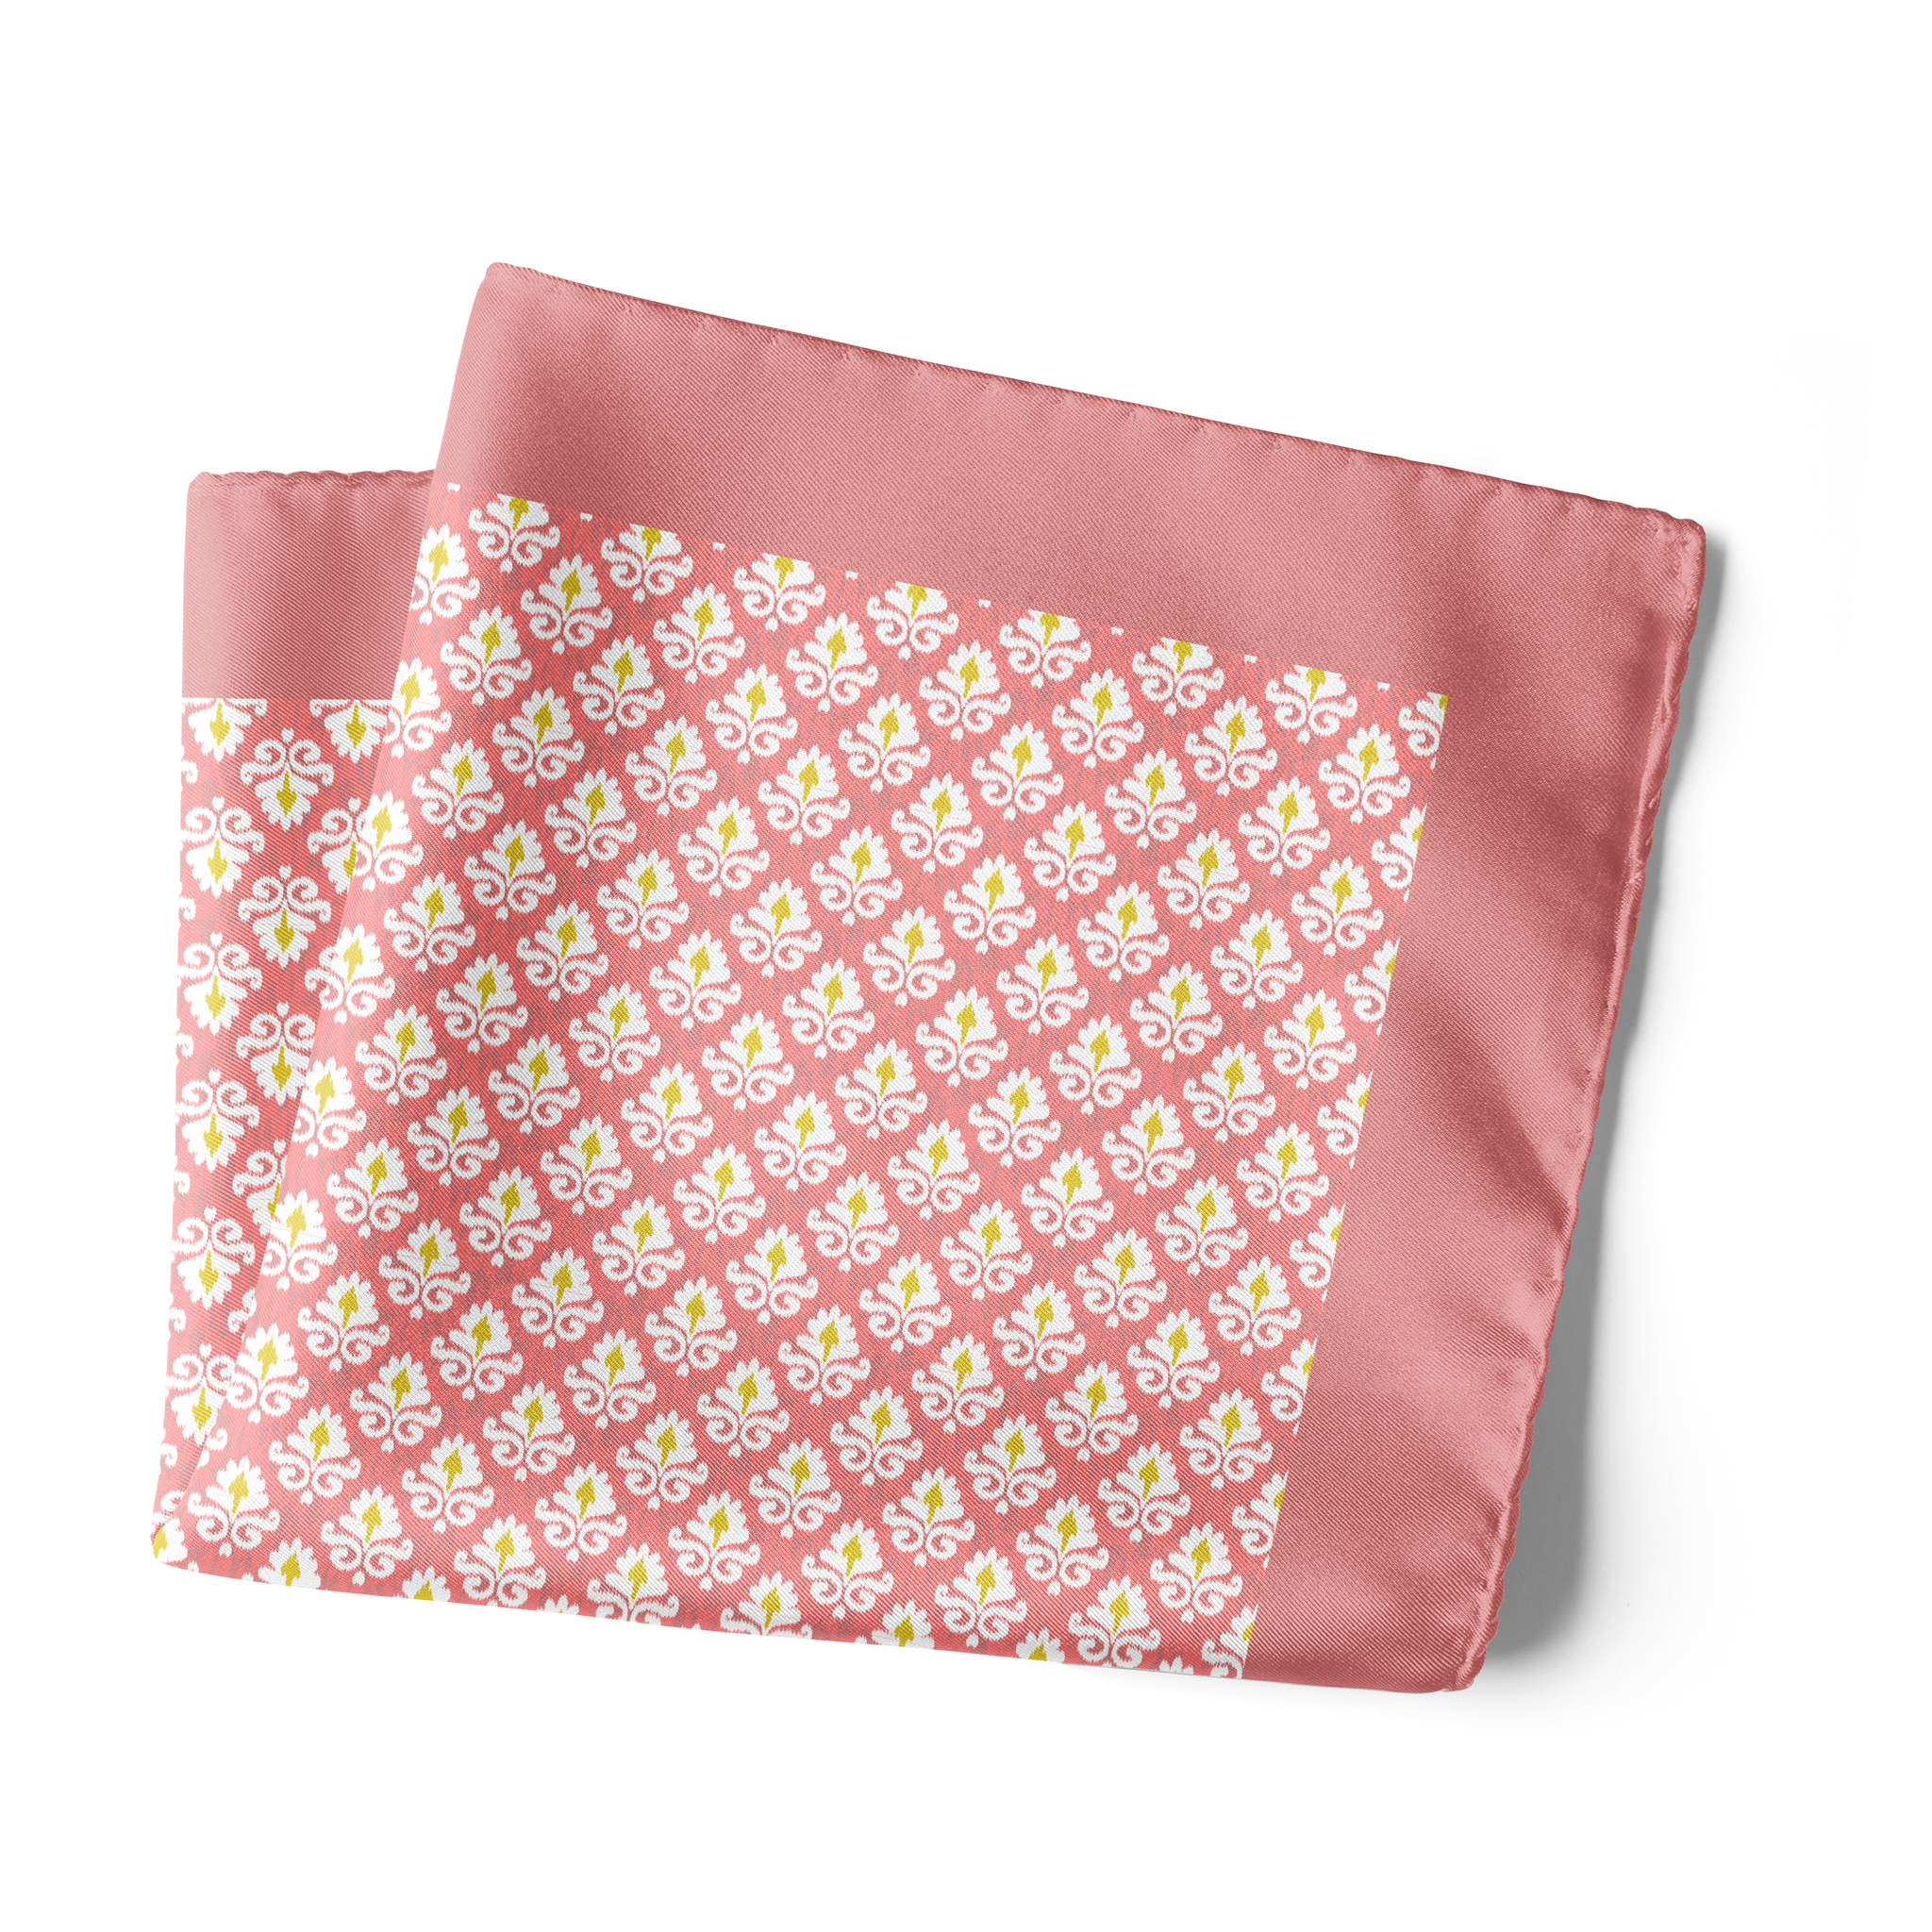 Chokore Peach Satin Silk pocket square from the Indian at Heart Collection